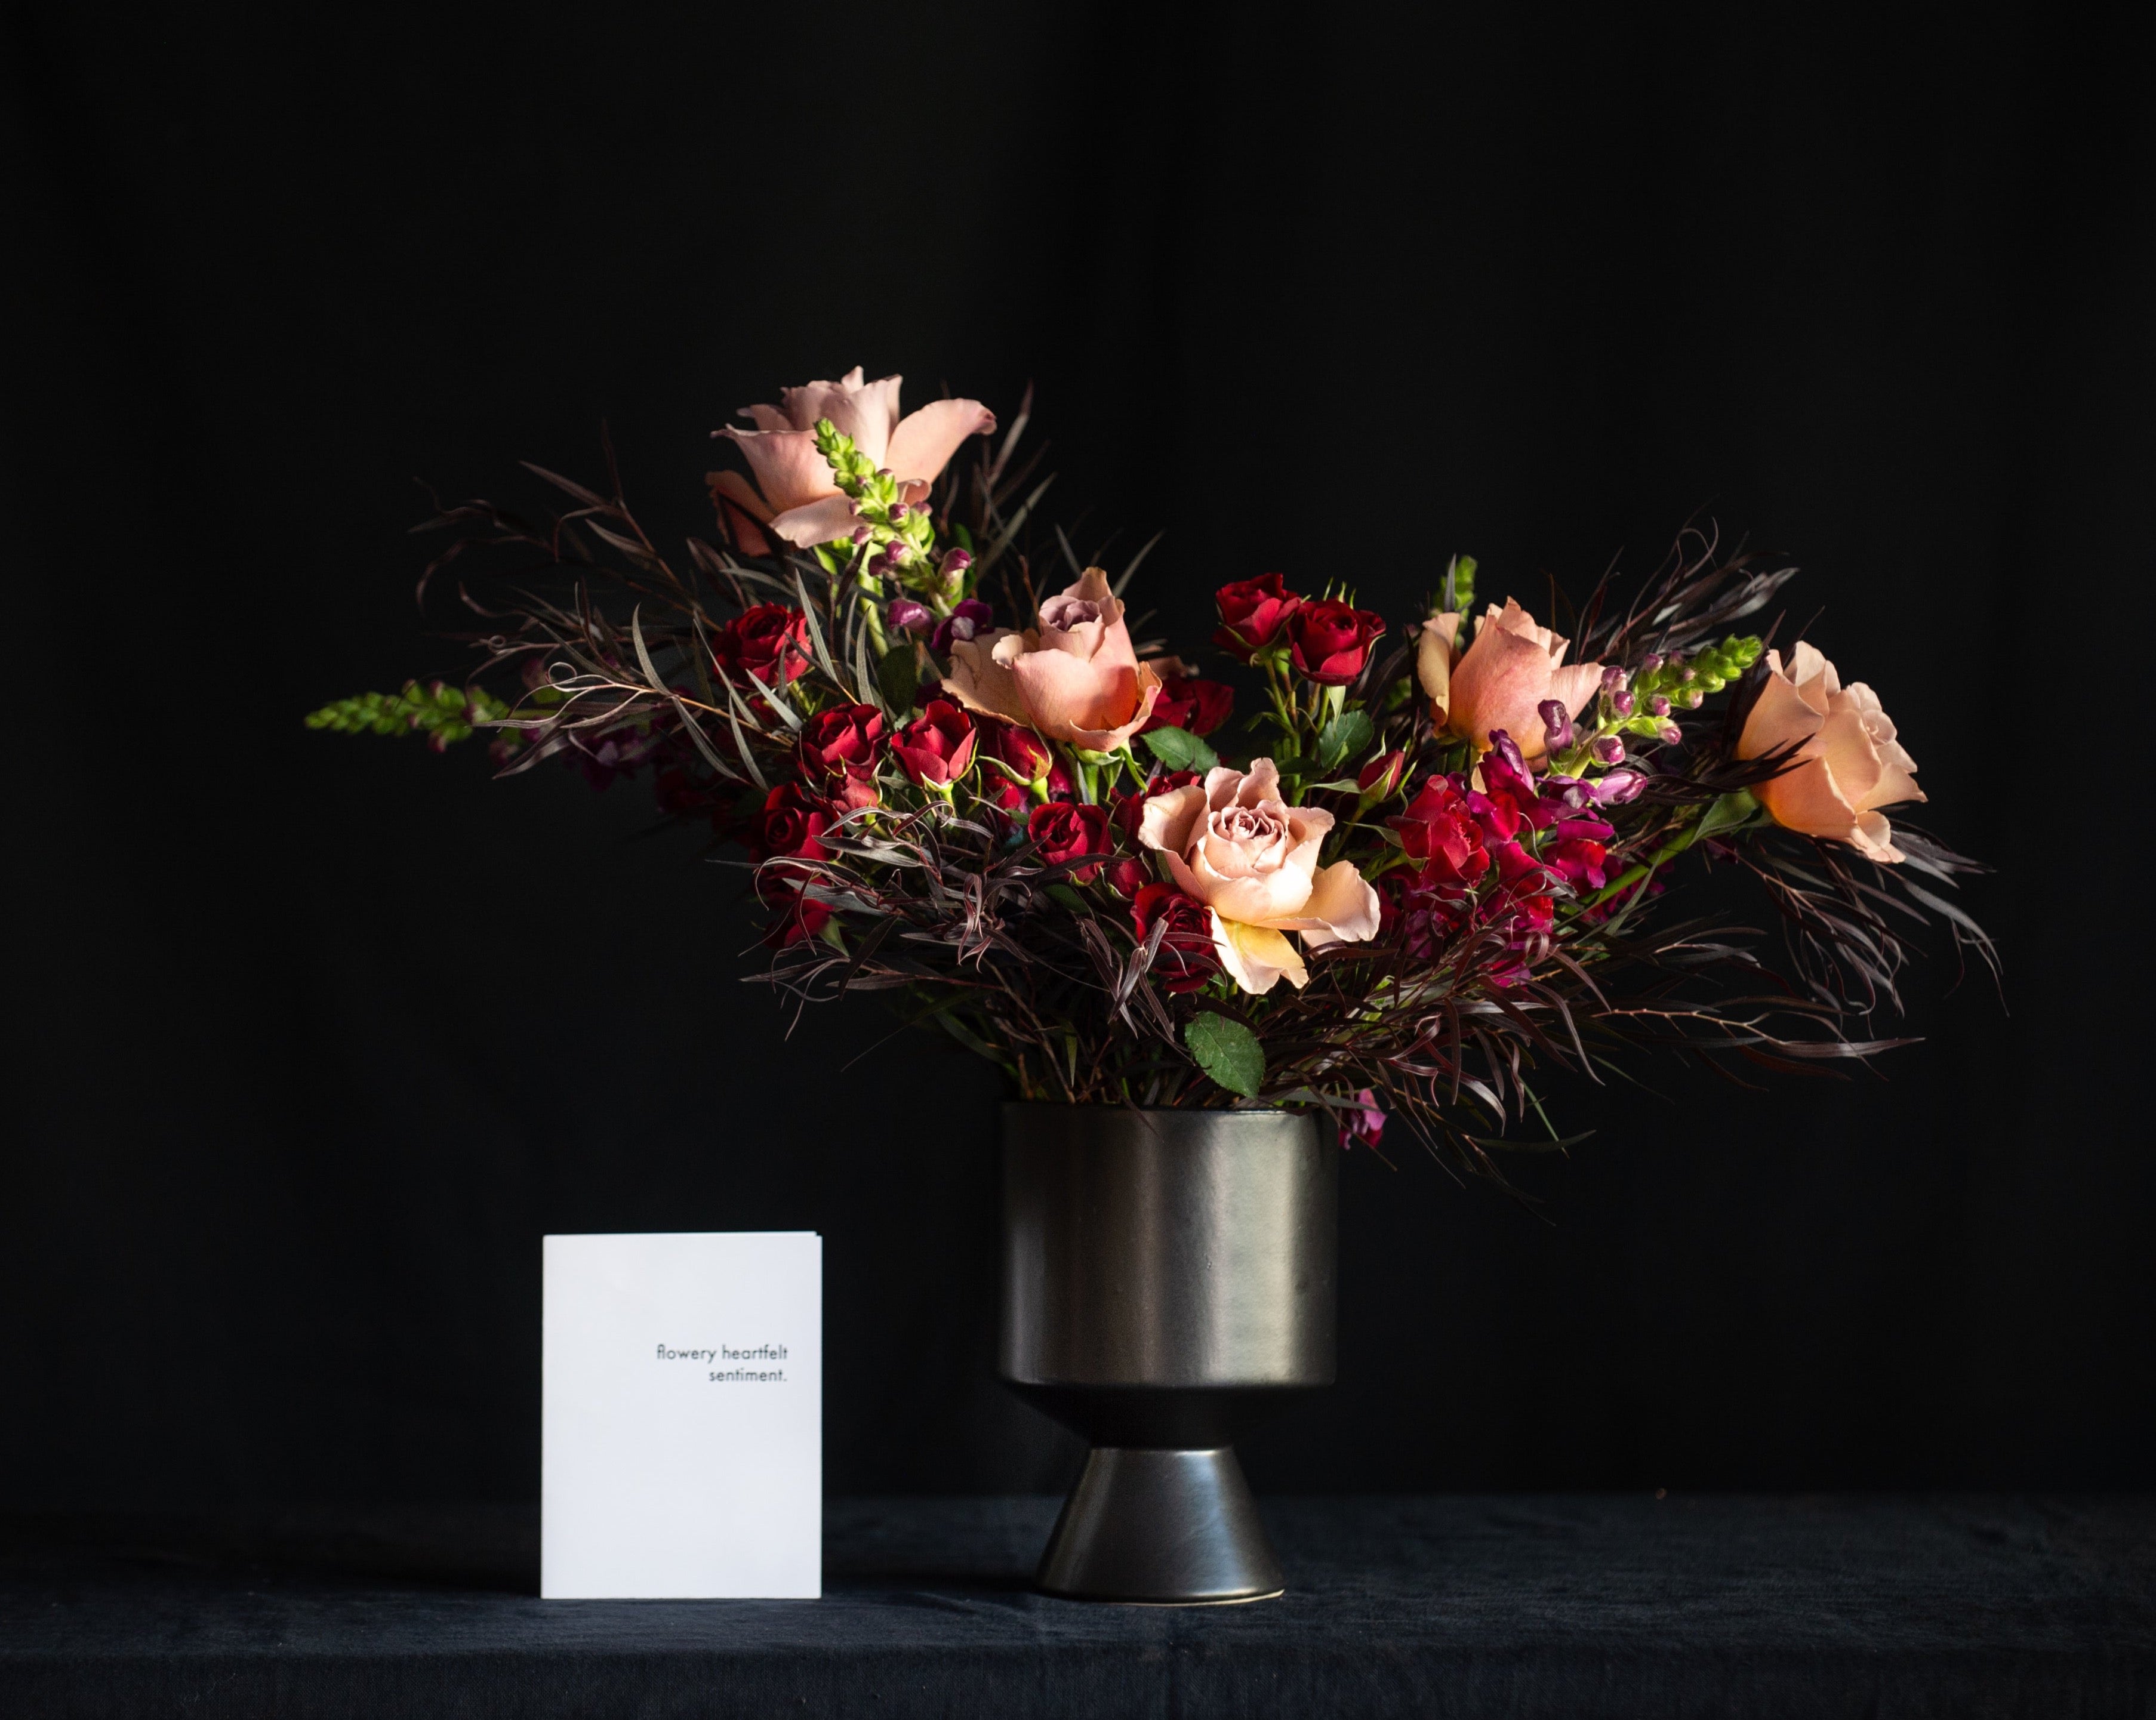 Garden roses, snap dragons, spray roses, and dark foliage in a black vase for valentines day